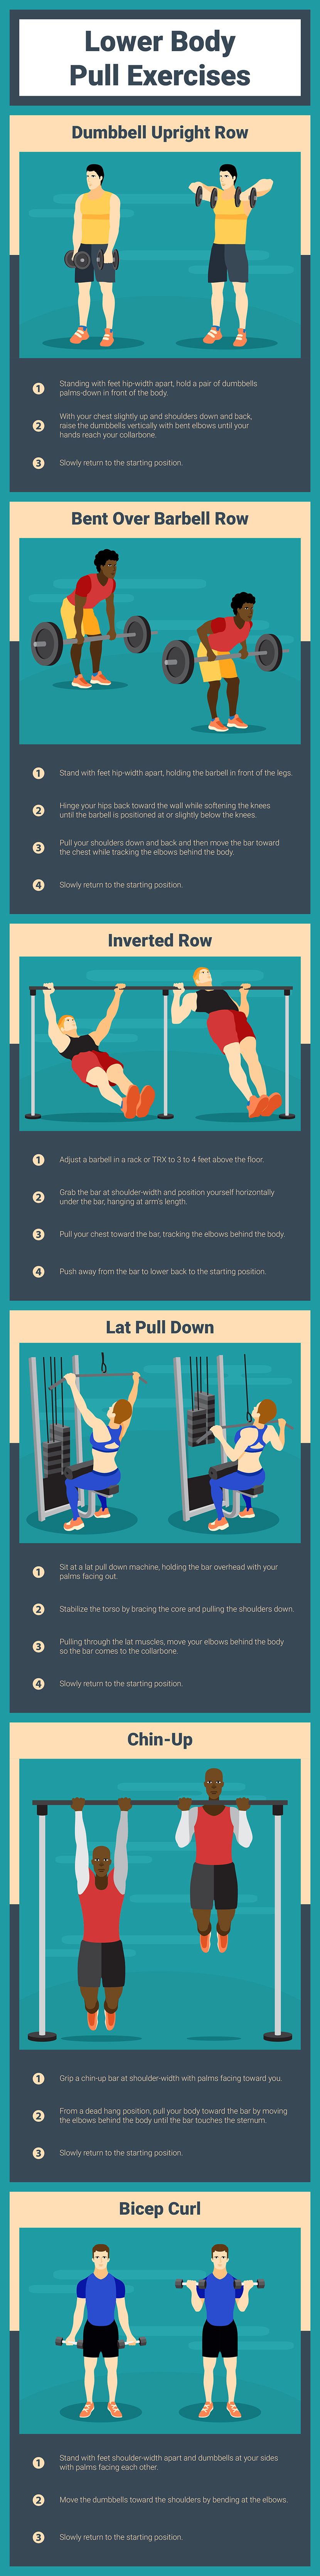 Lower body pull exercises on equipment at the gym